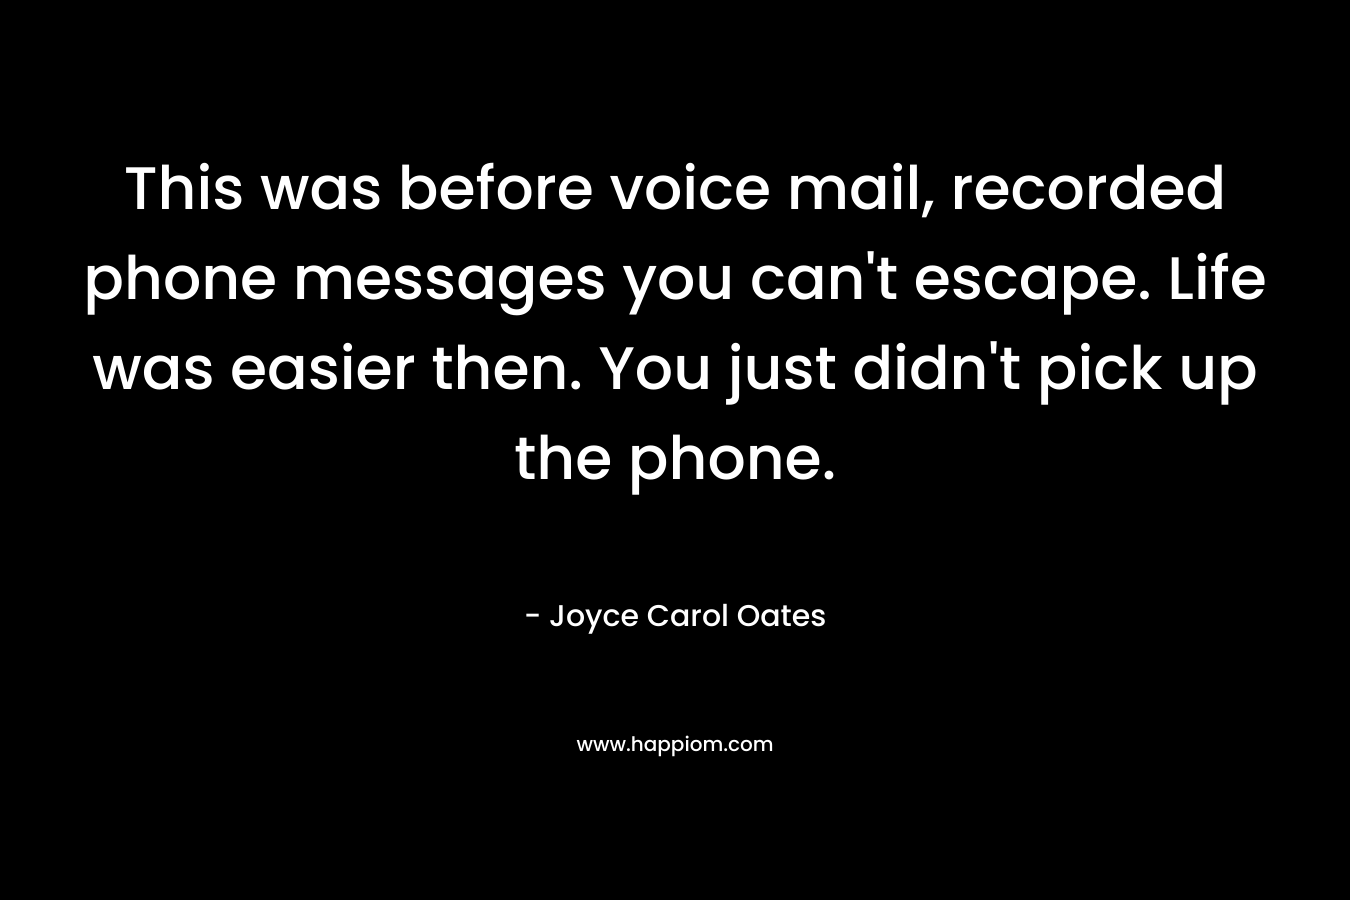 This was before voice mail, recorded phone messages you can’t escape. Life was easier then. You just didn’t pick up the phone. – Joyce Carol Oates